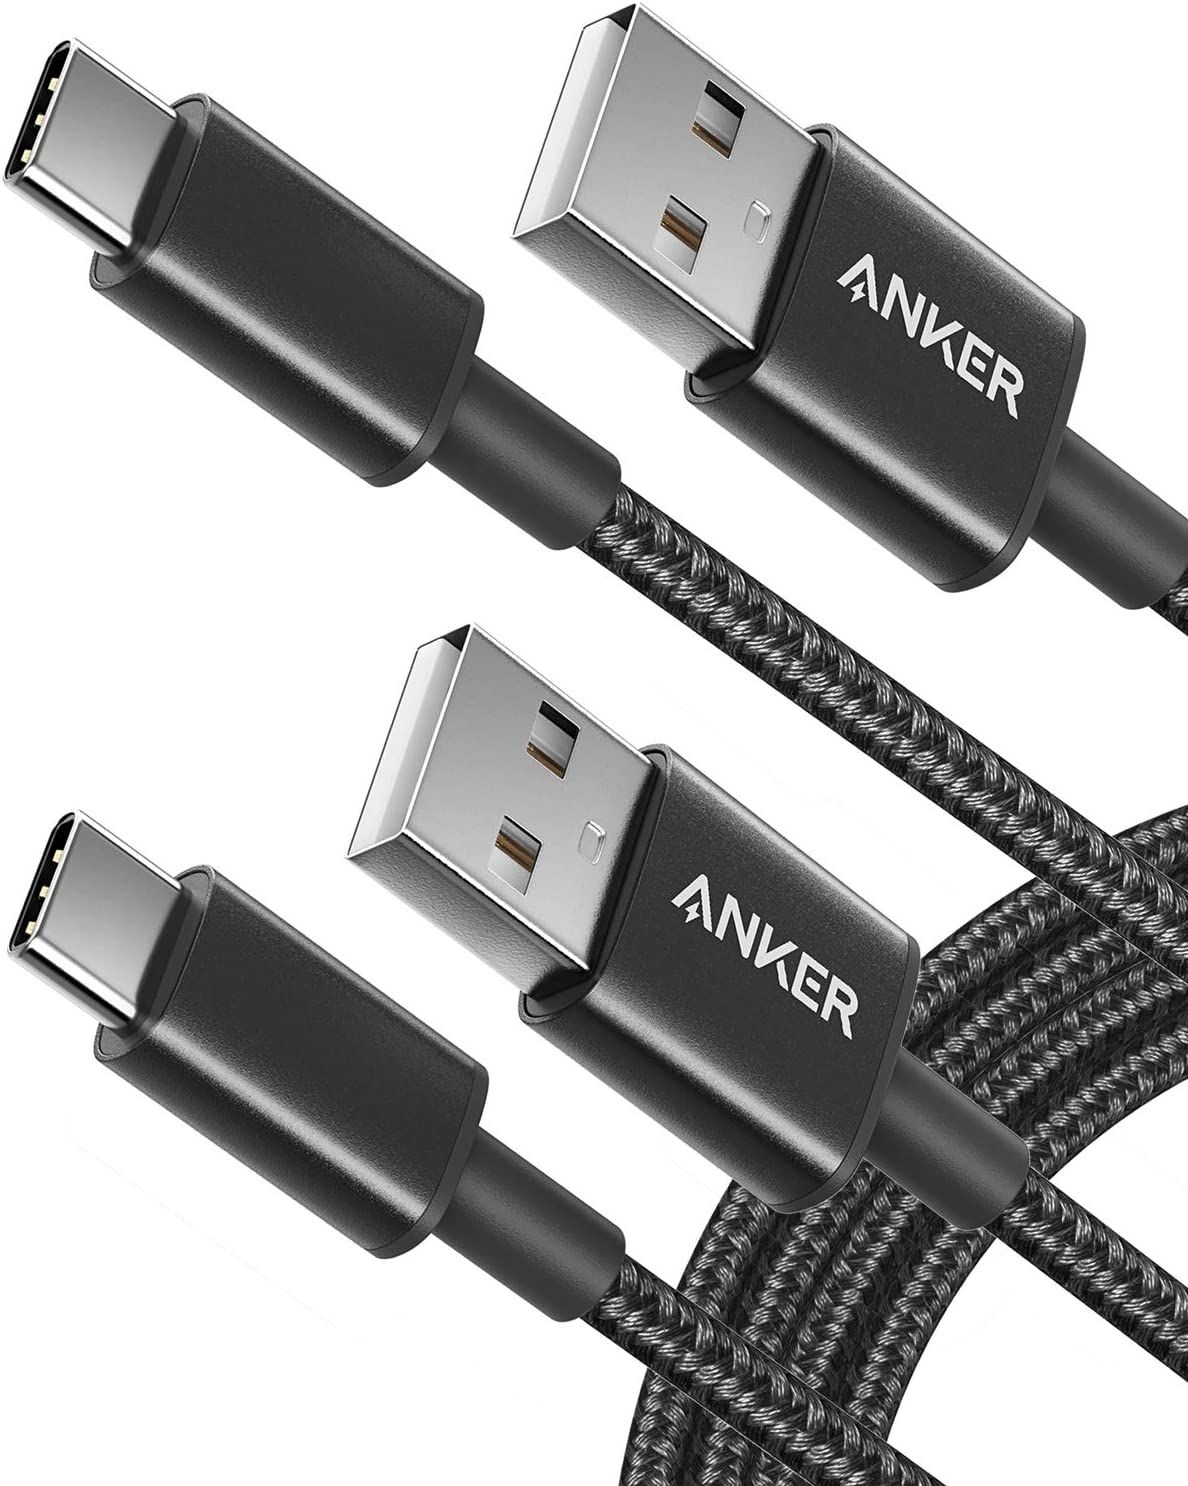 Anker USB-C cable (2-pack)